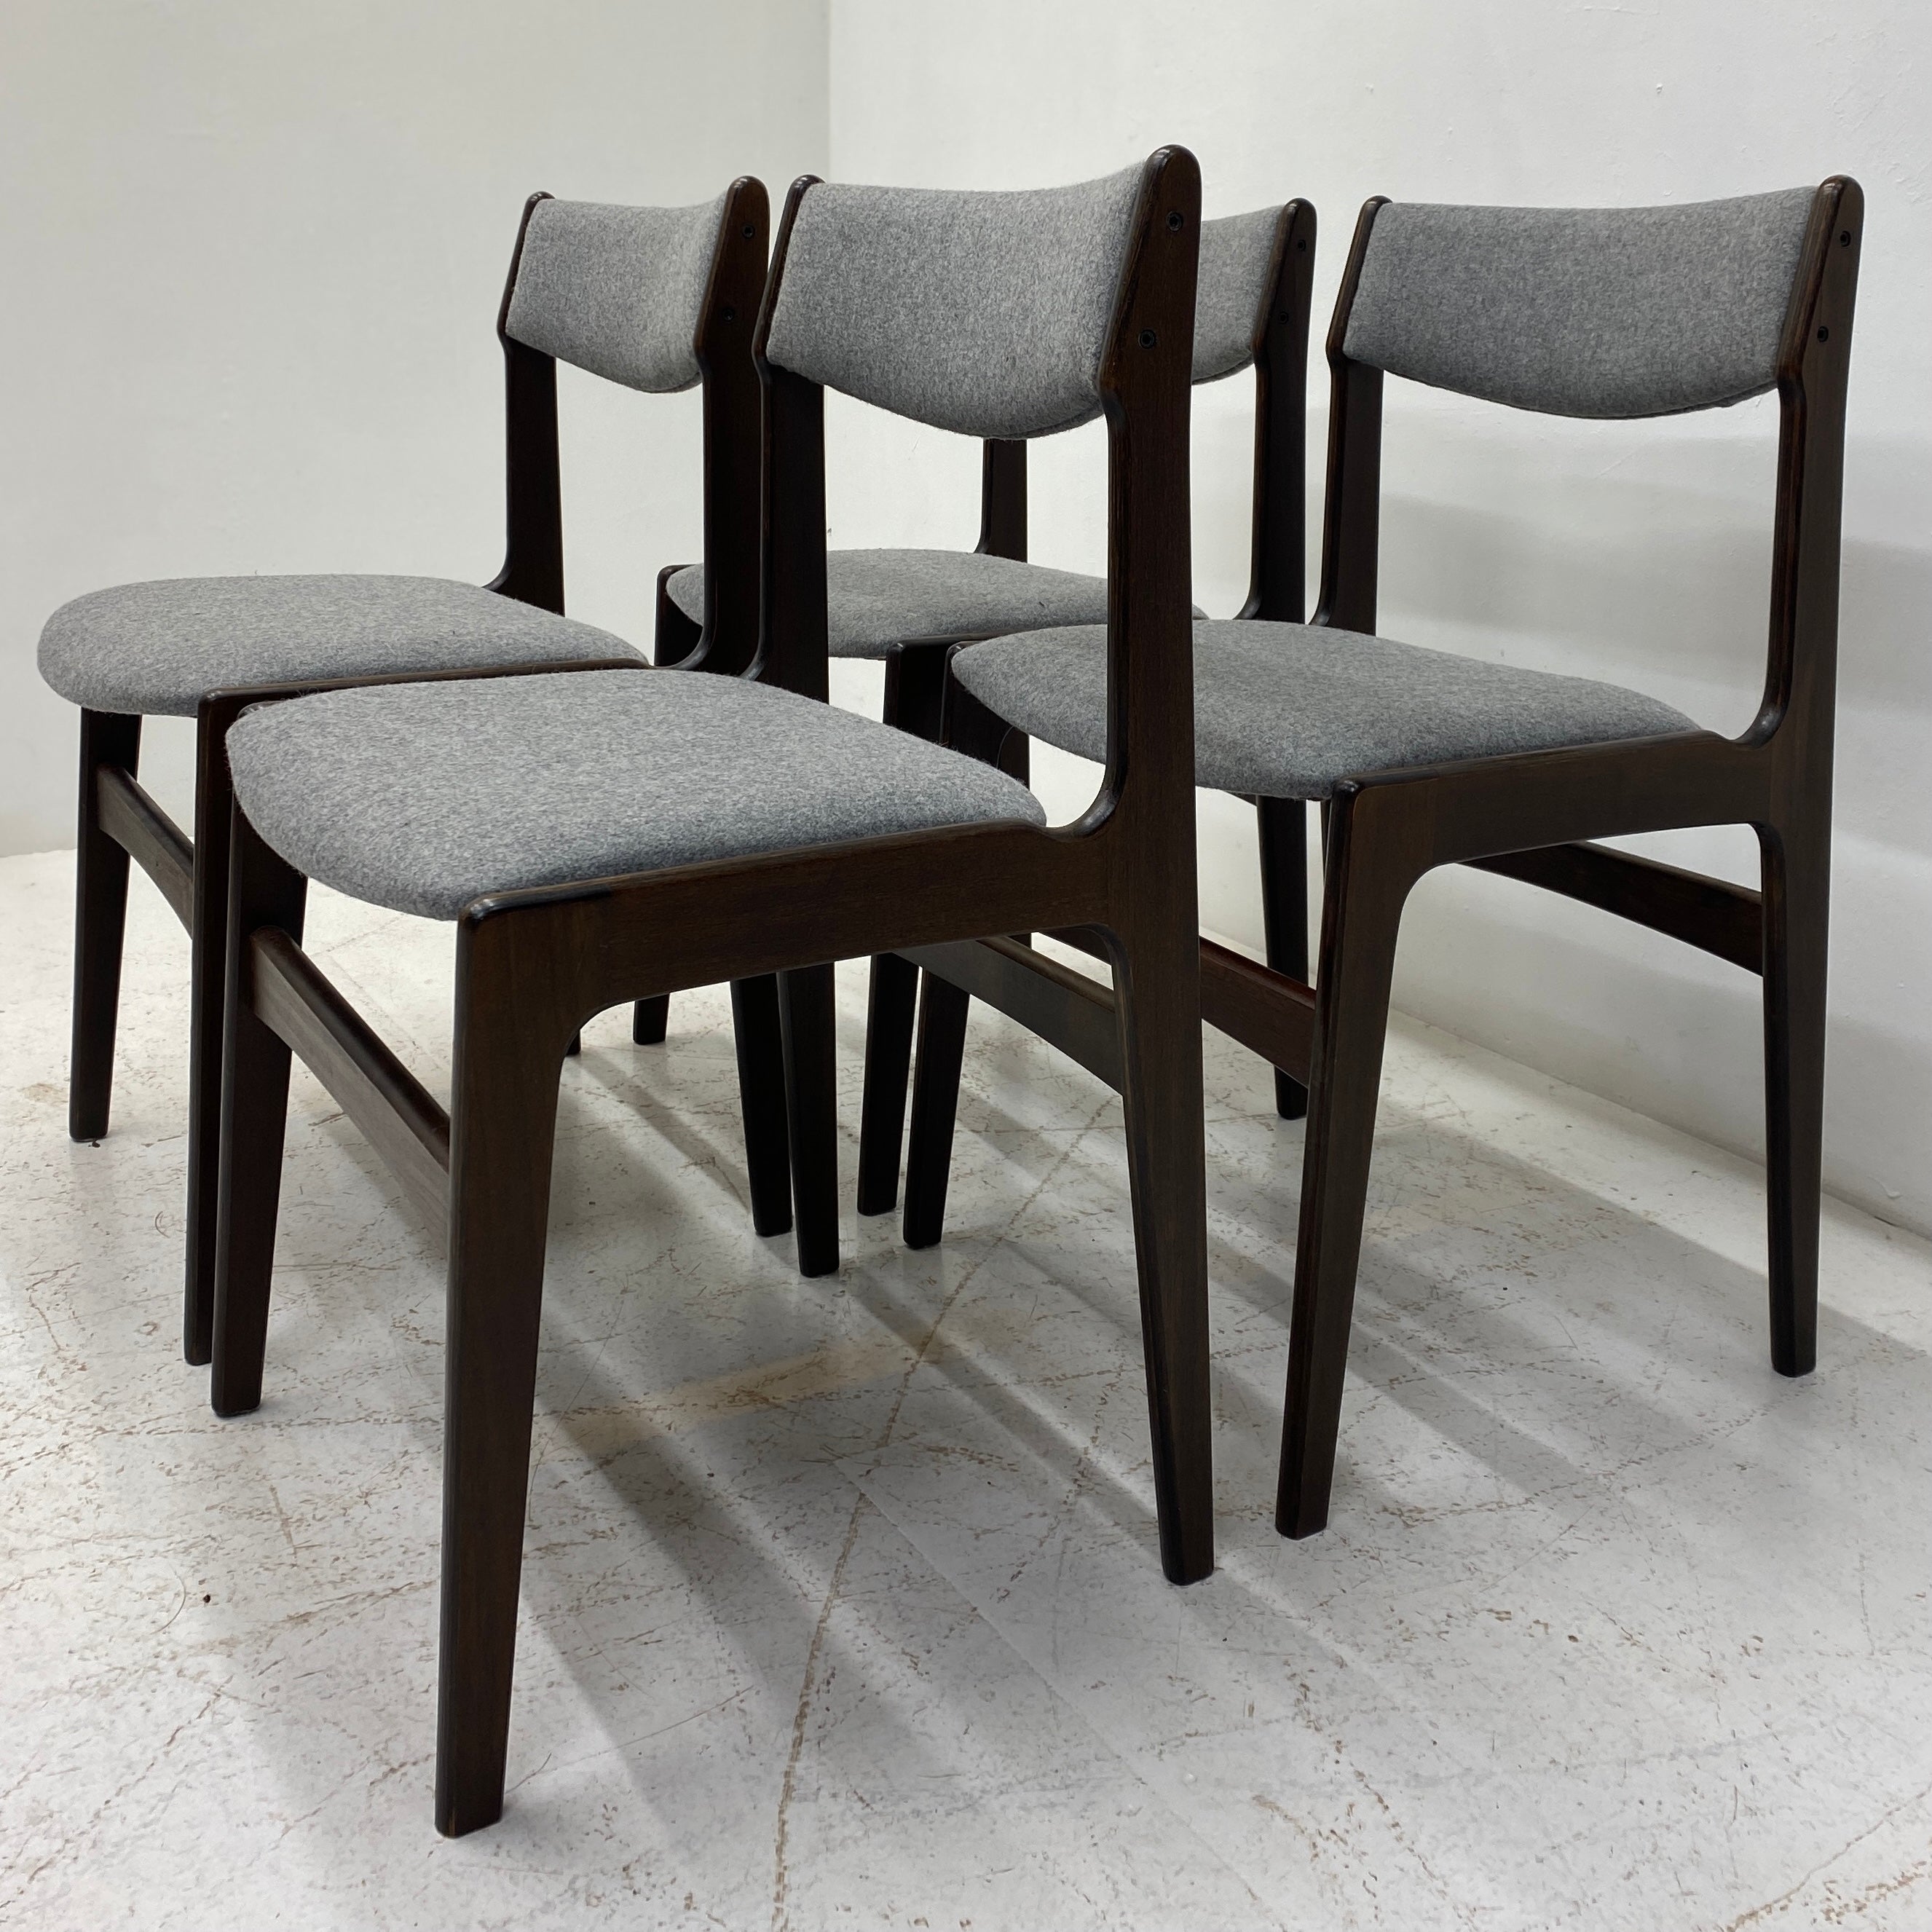 Side Of Erik Buch Dining Chairs Danish